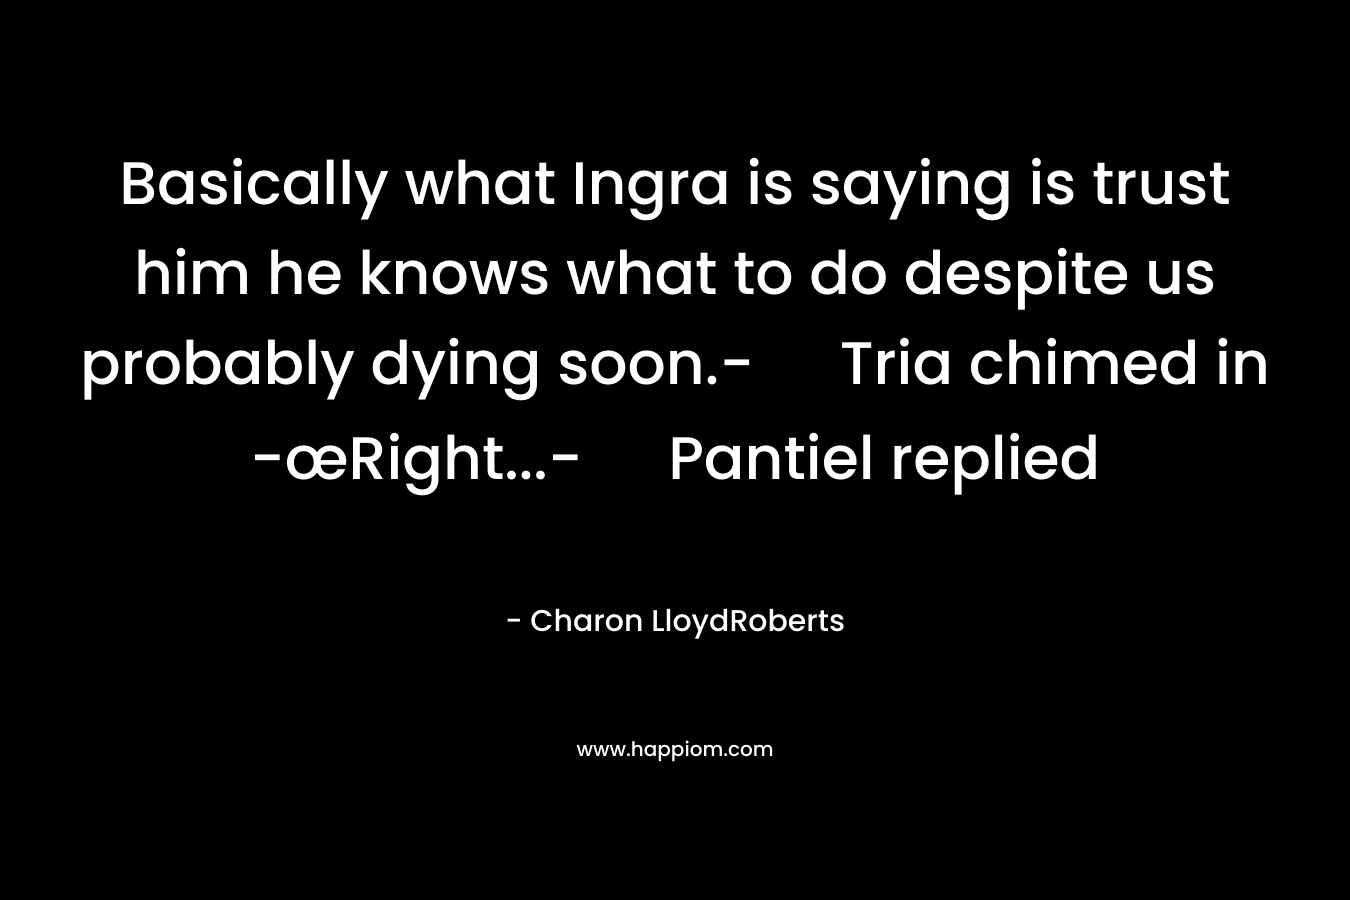 Basically what Ingra is saying is trust him he knows what to do despite us probably dying soon.- Tria chimed in -œRight...- Pantiel replied